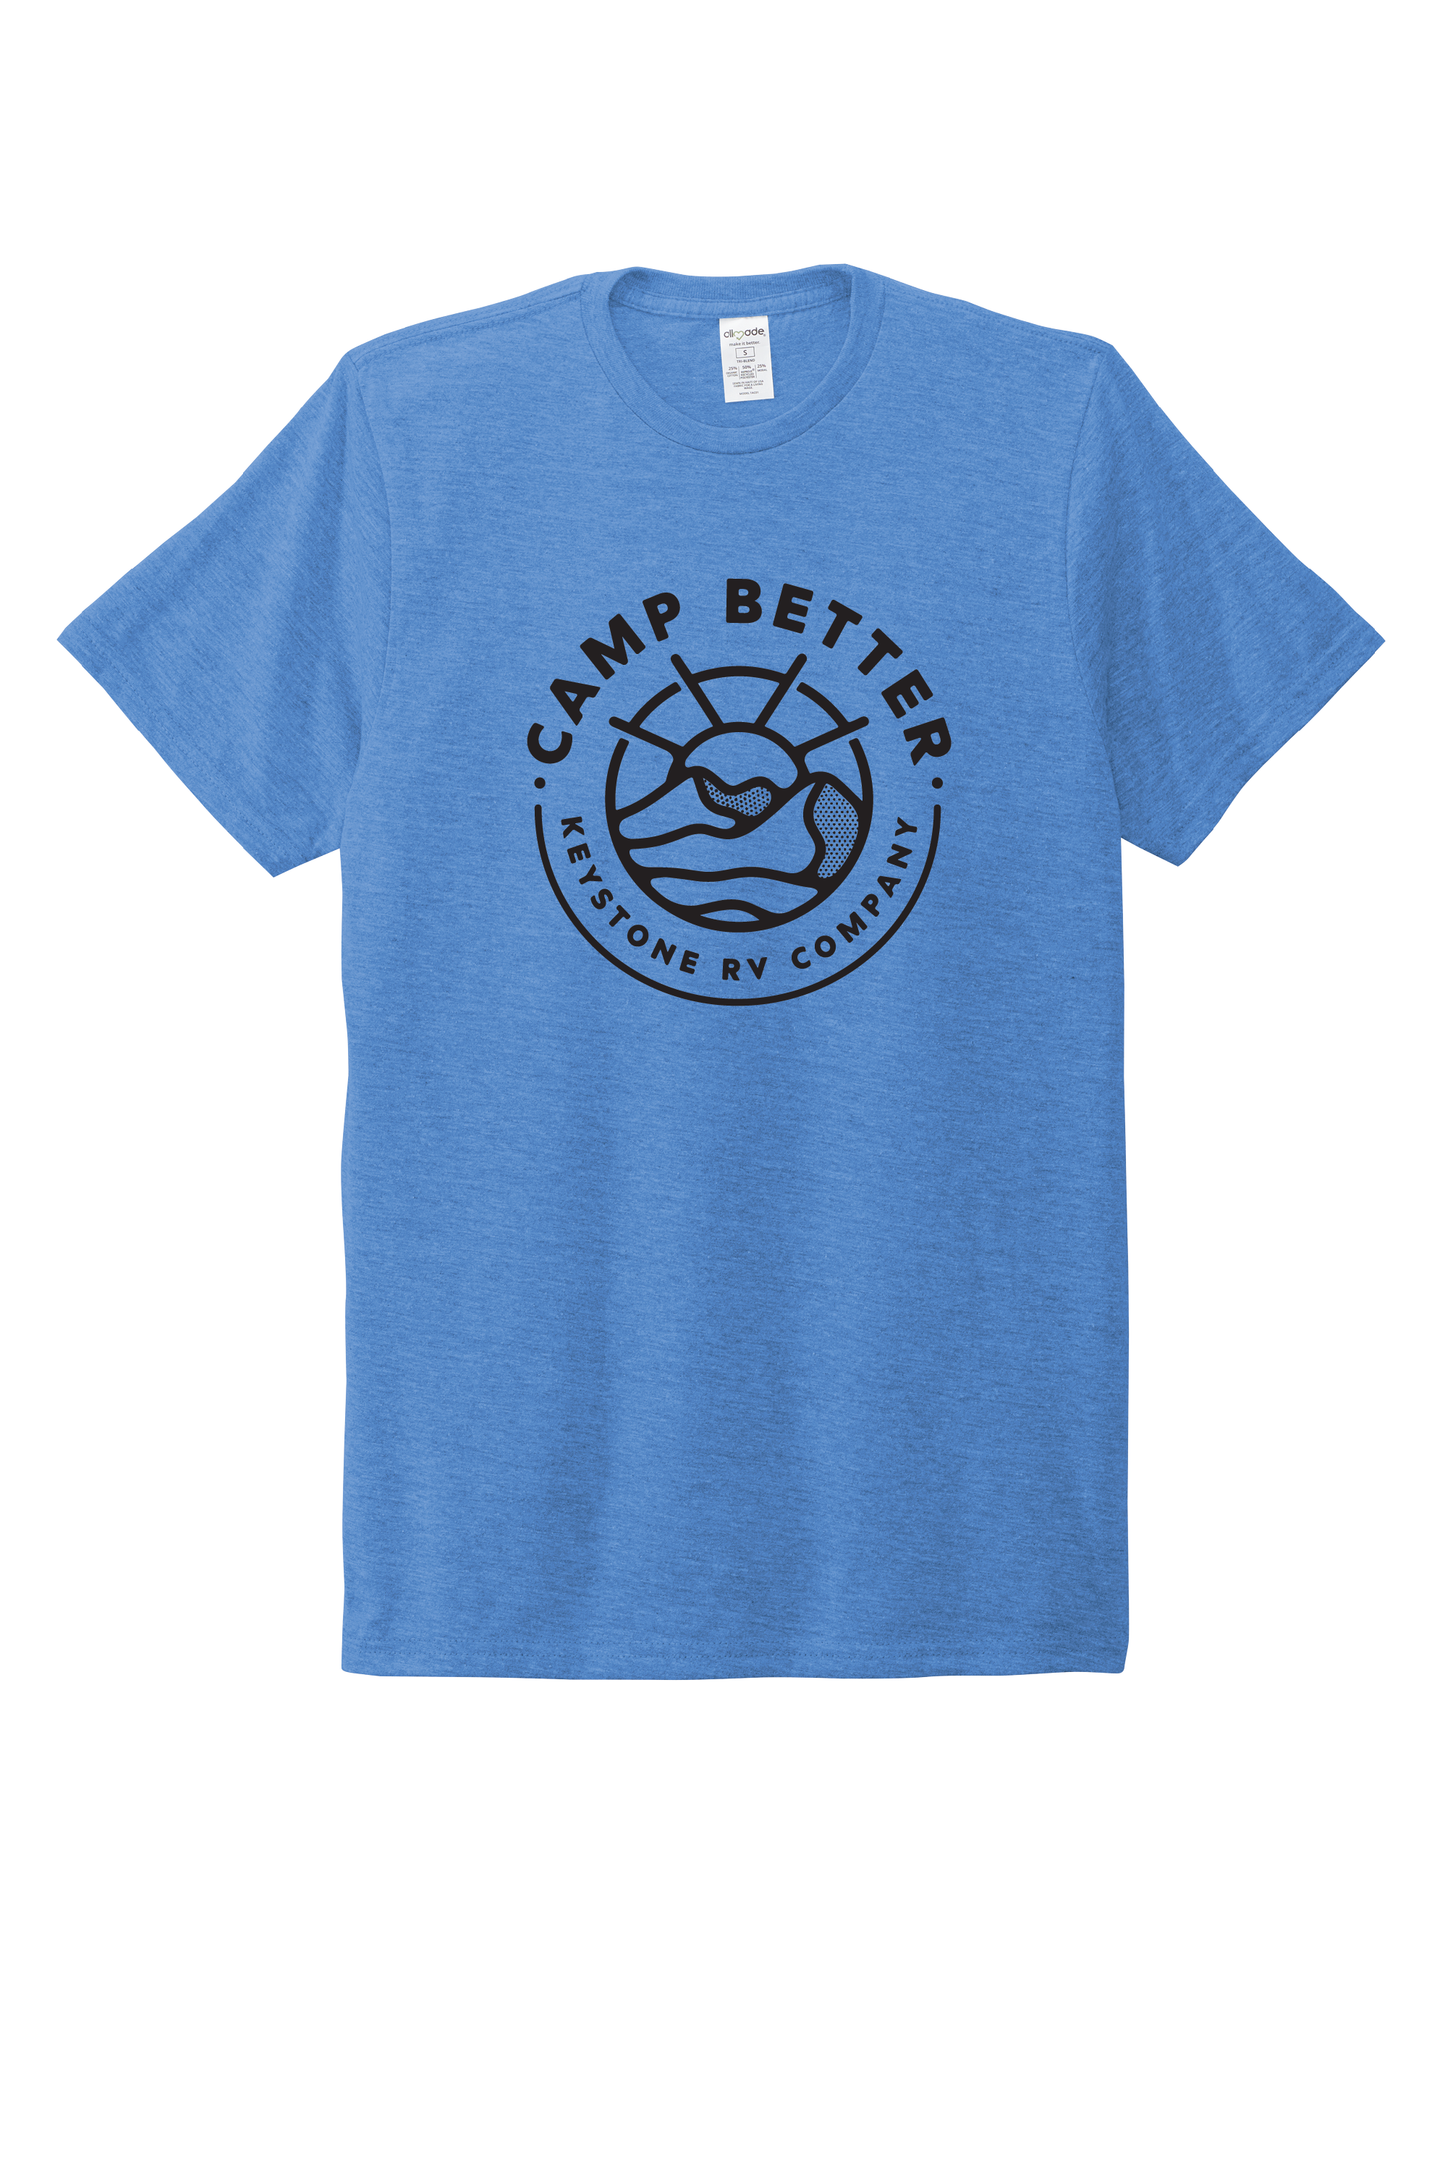 Camp Better Youth T Shirt - AL2004Y